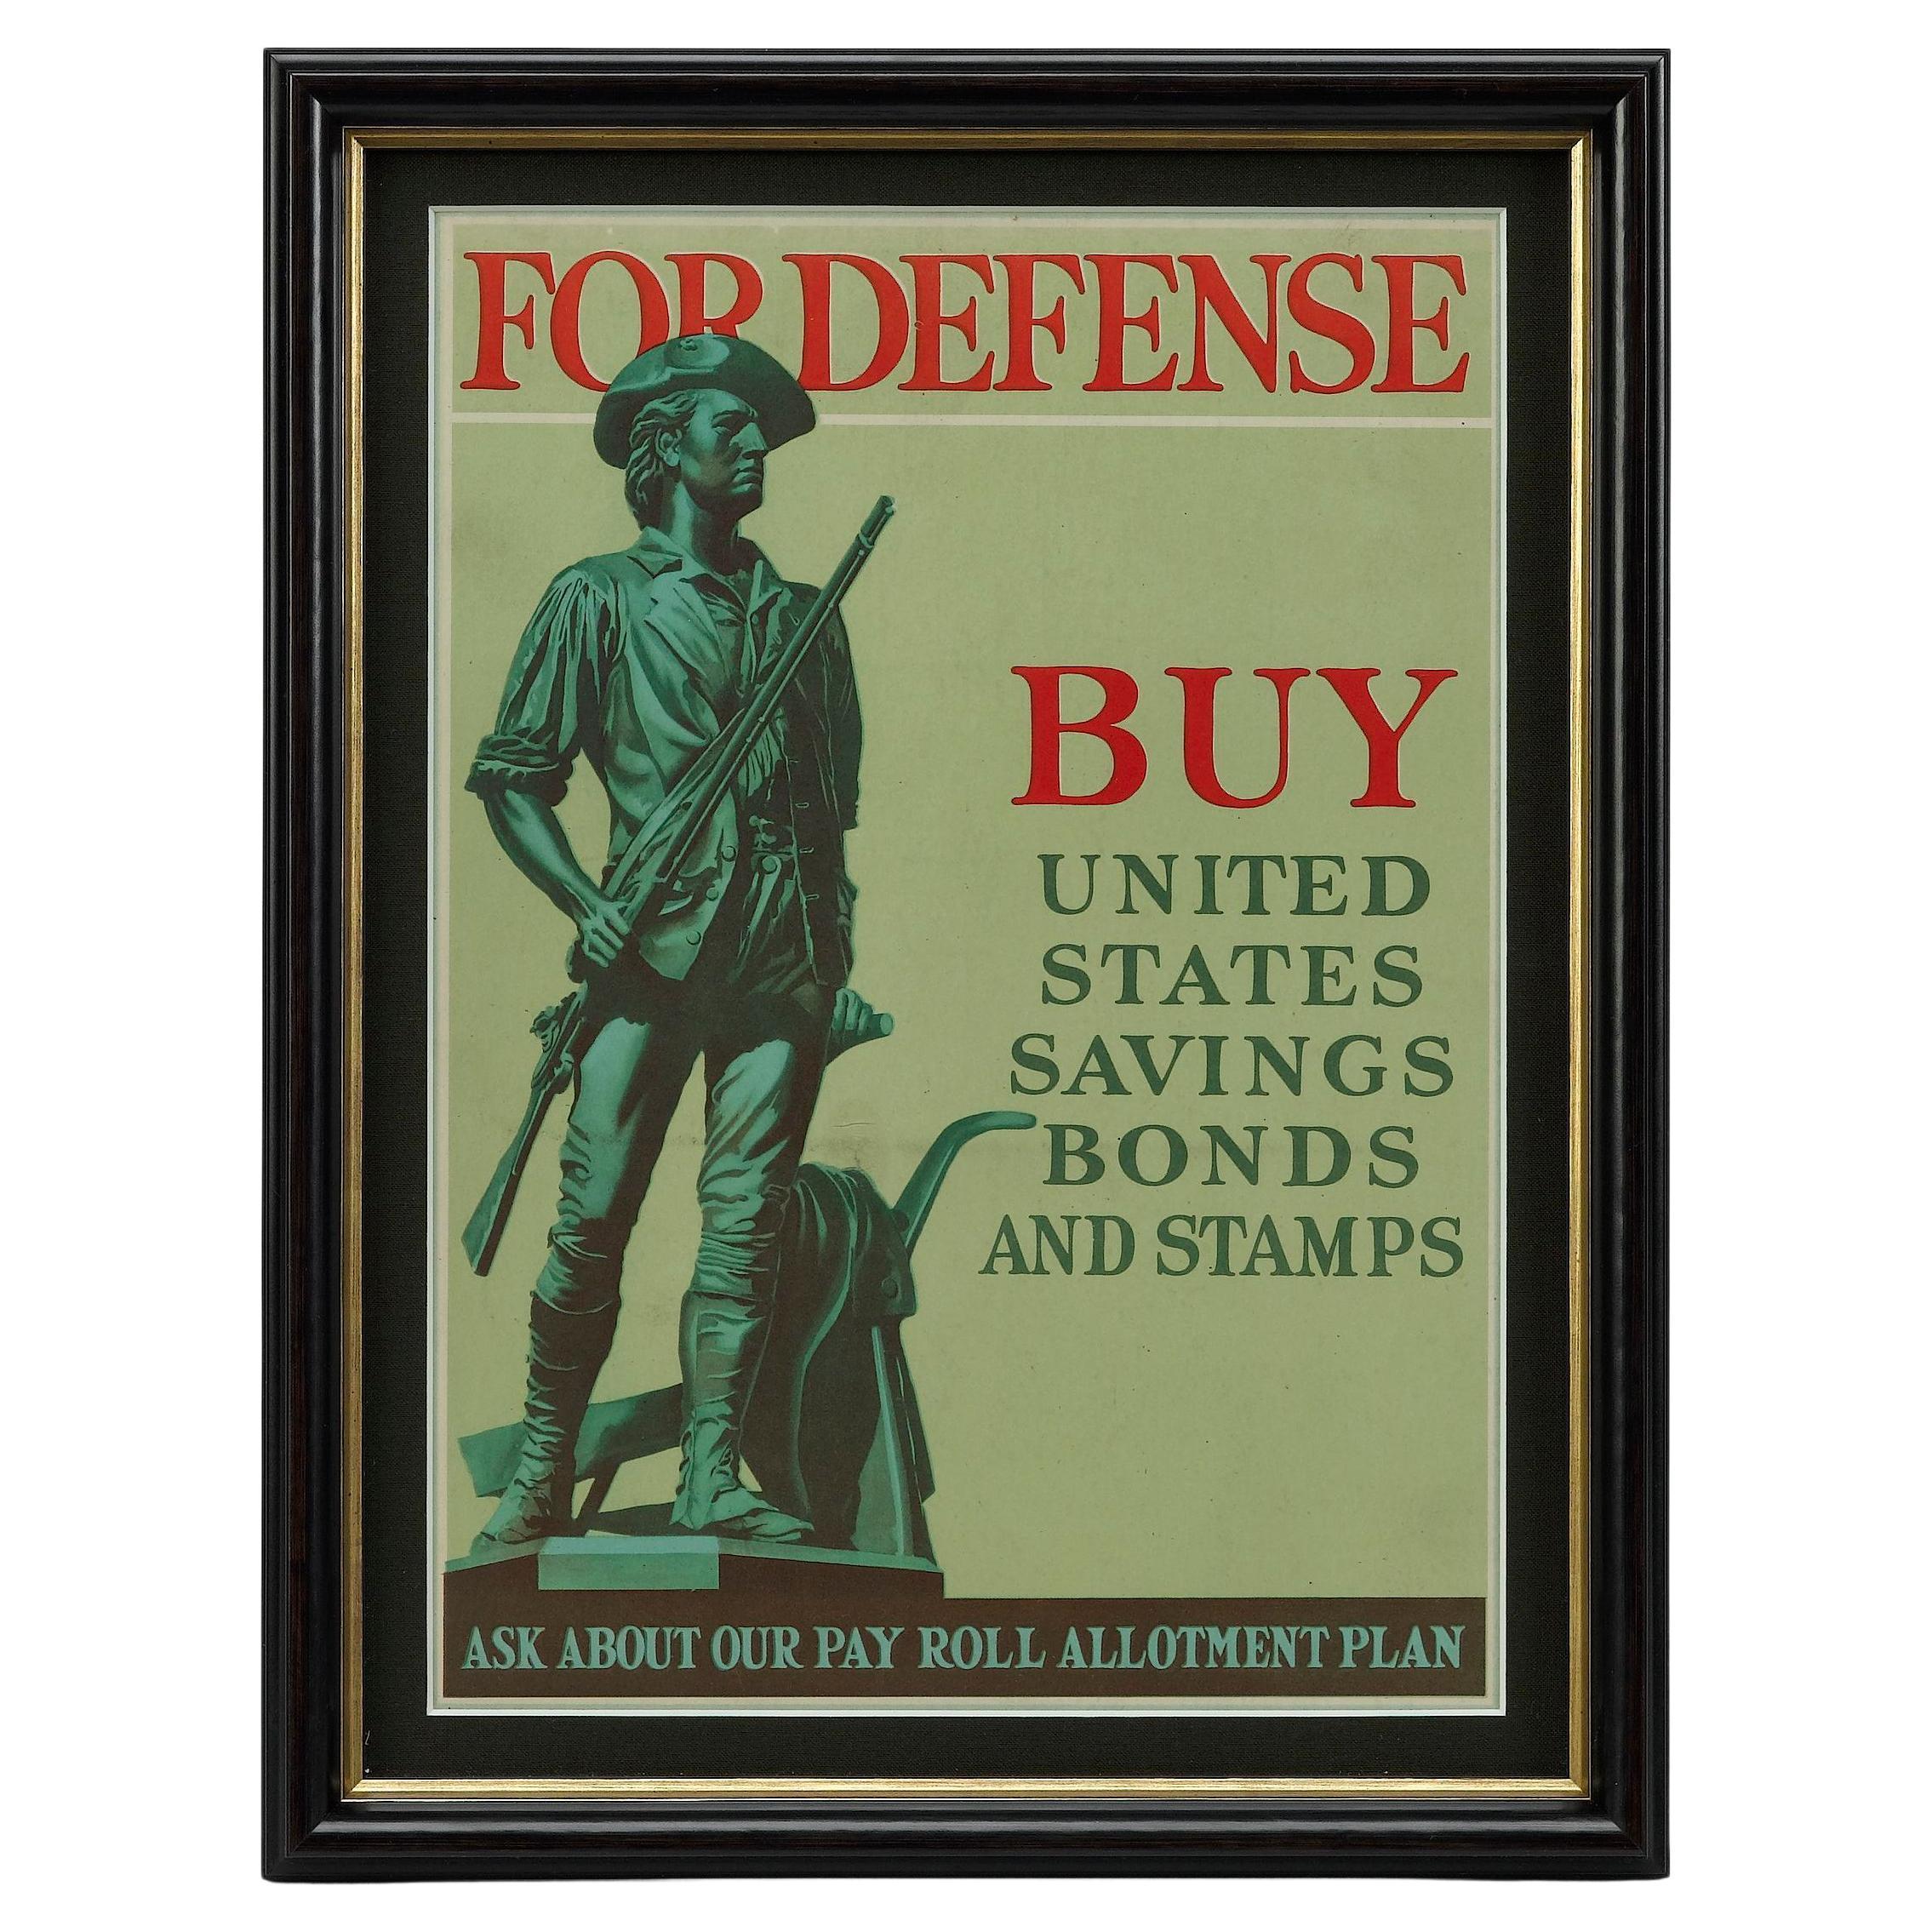 "For Defense, Buy United States Savings Bonds and Stamps." Vintage WWII Poster